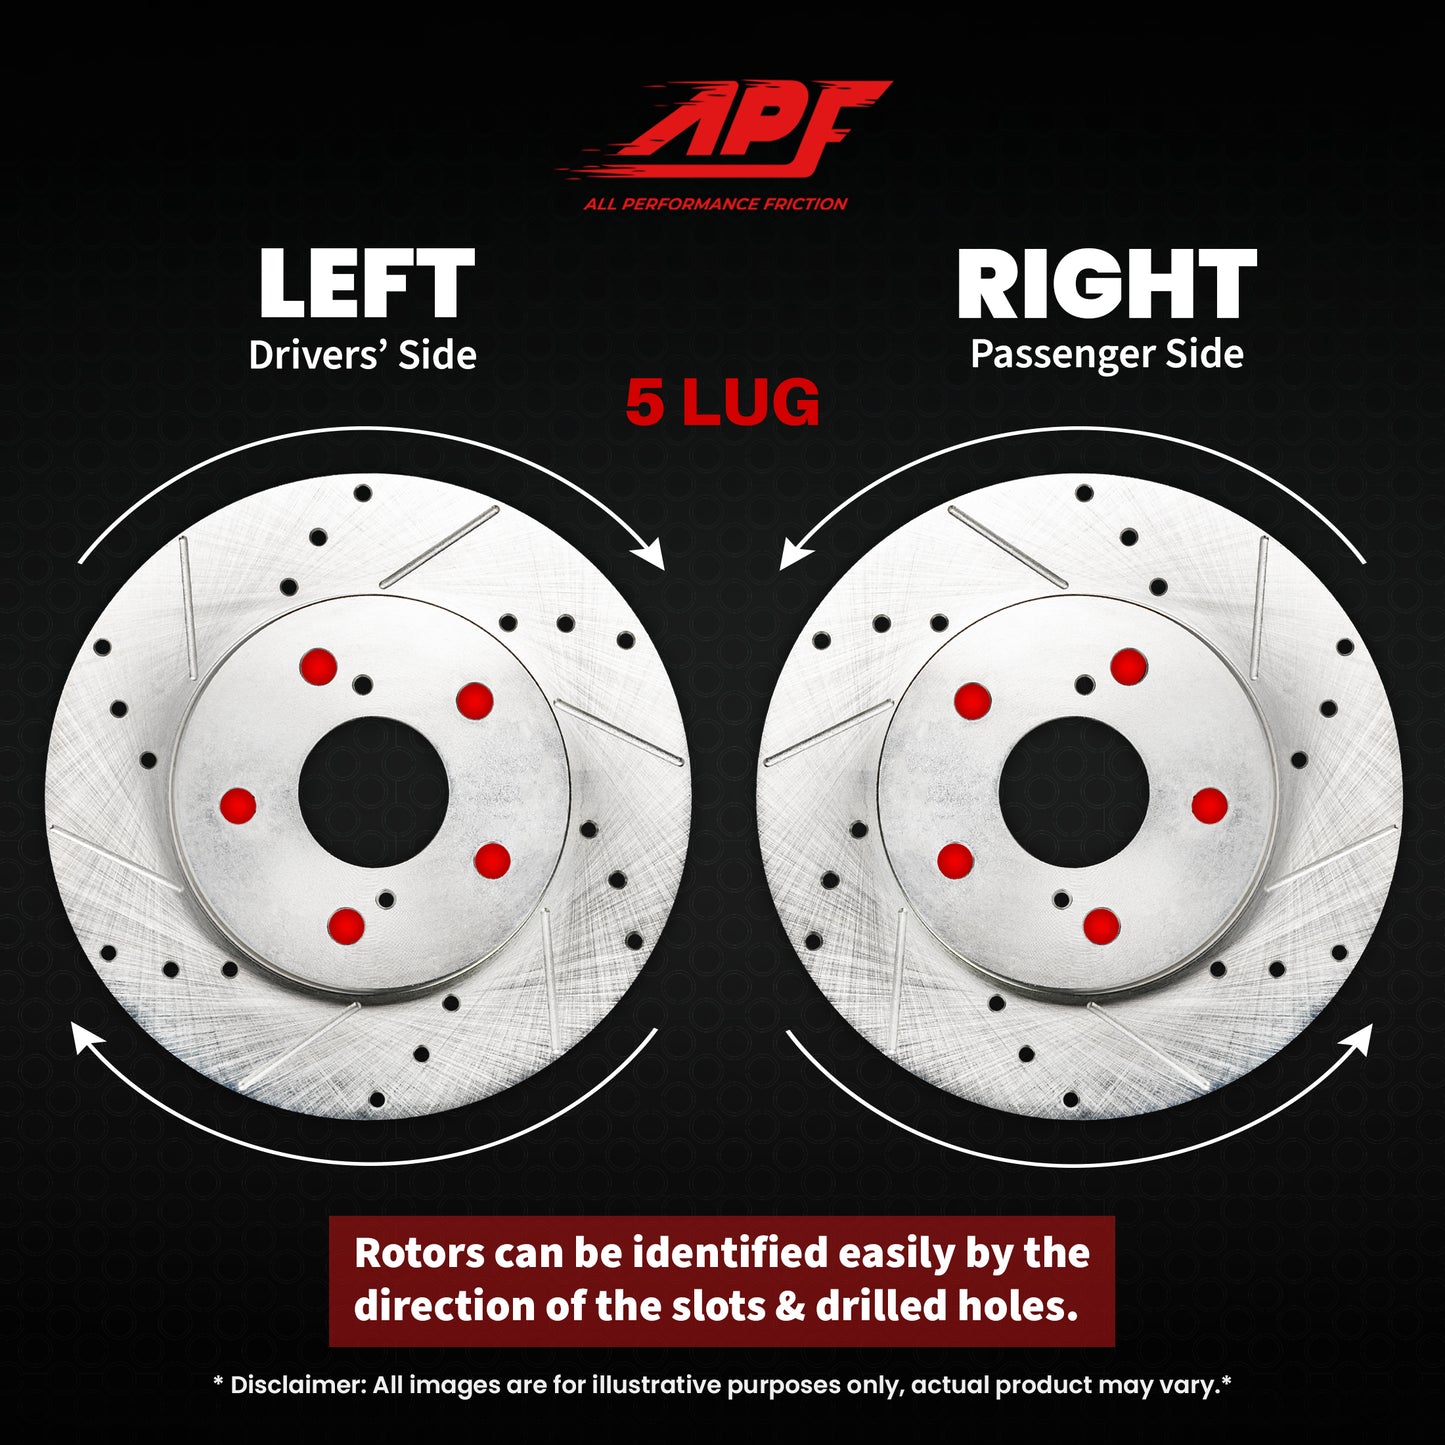 APF All Performance Friction Rear Rotors compatible with Audi A4 2009-2019 Zinc Drilled Slotted Rotors | $113.79